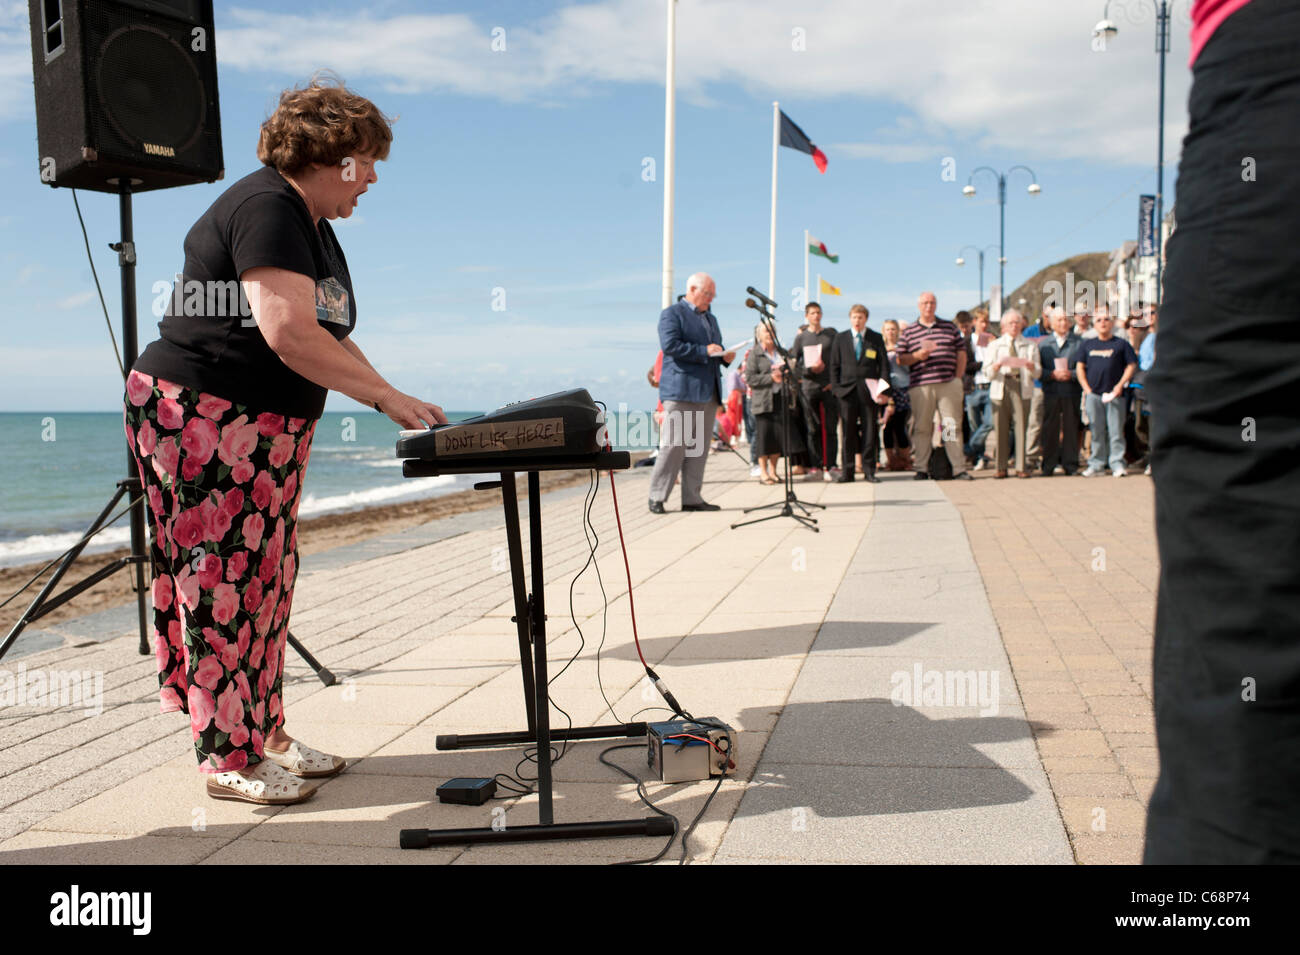 A woman playing the organ at a Evangelical Christian outdoor worship service on the promenade at Aberystwyth Wales UK Stock Photo